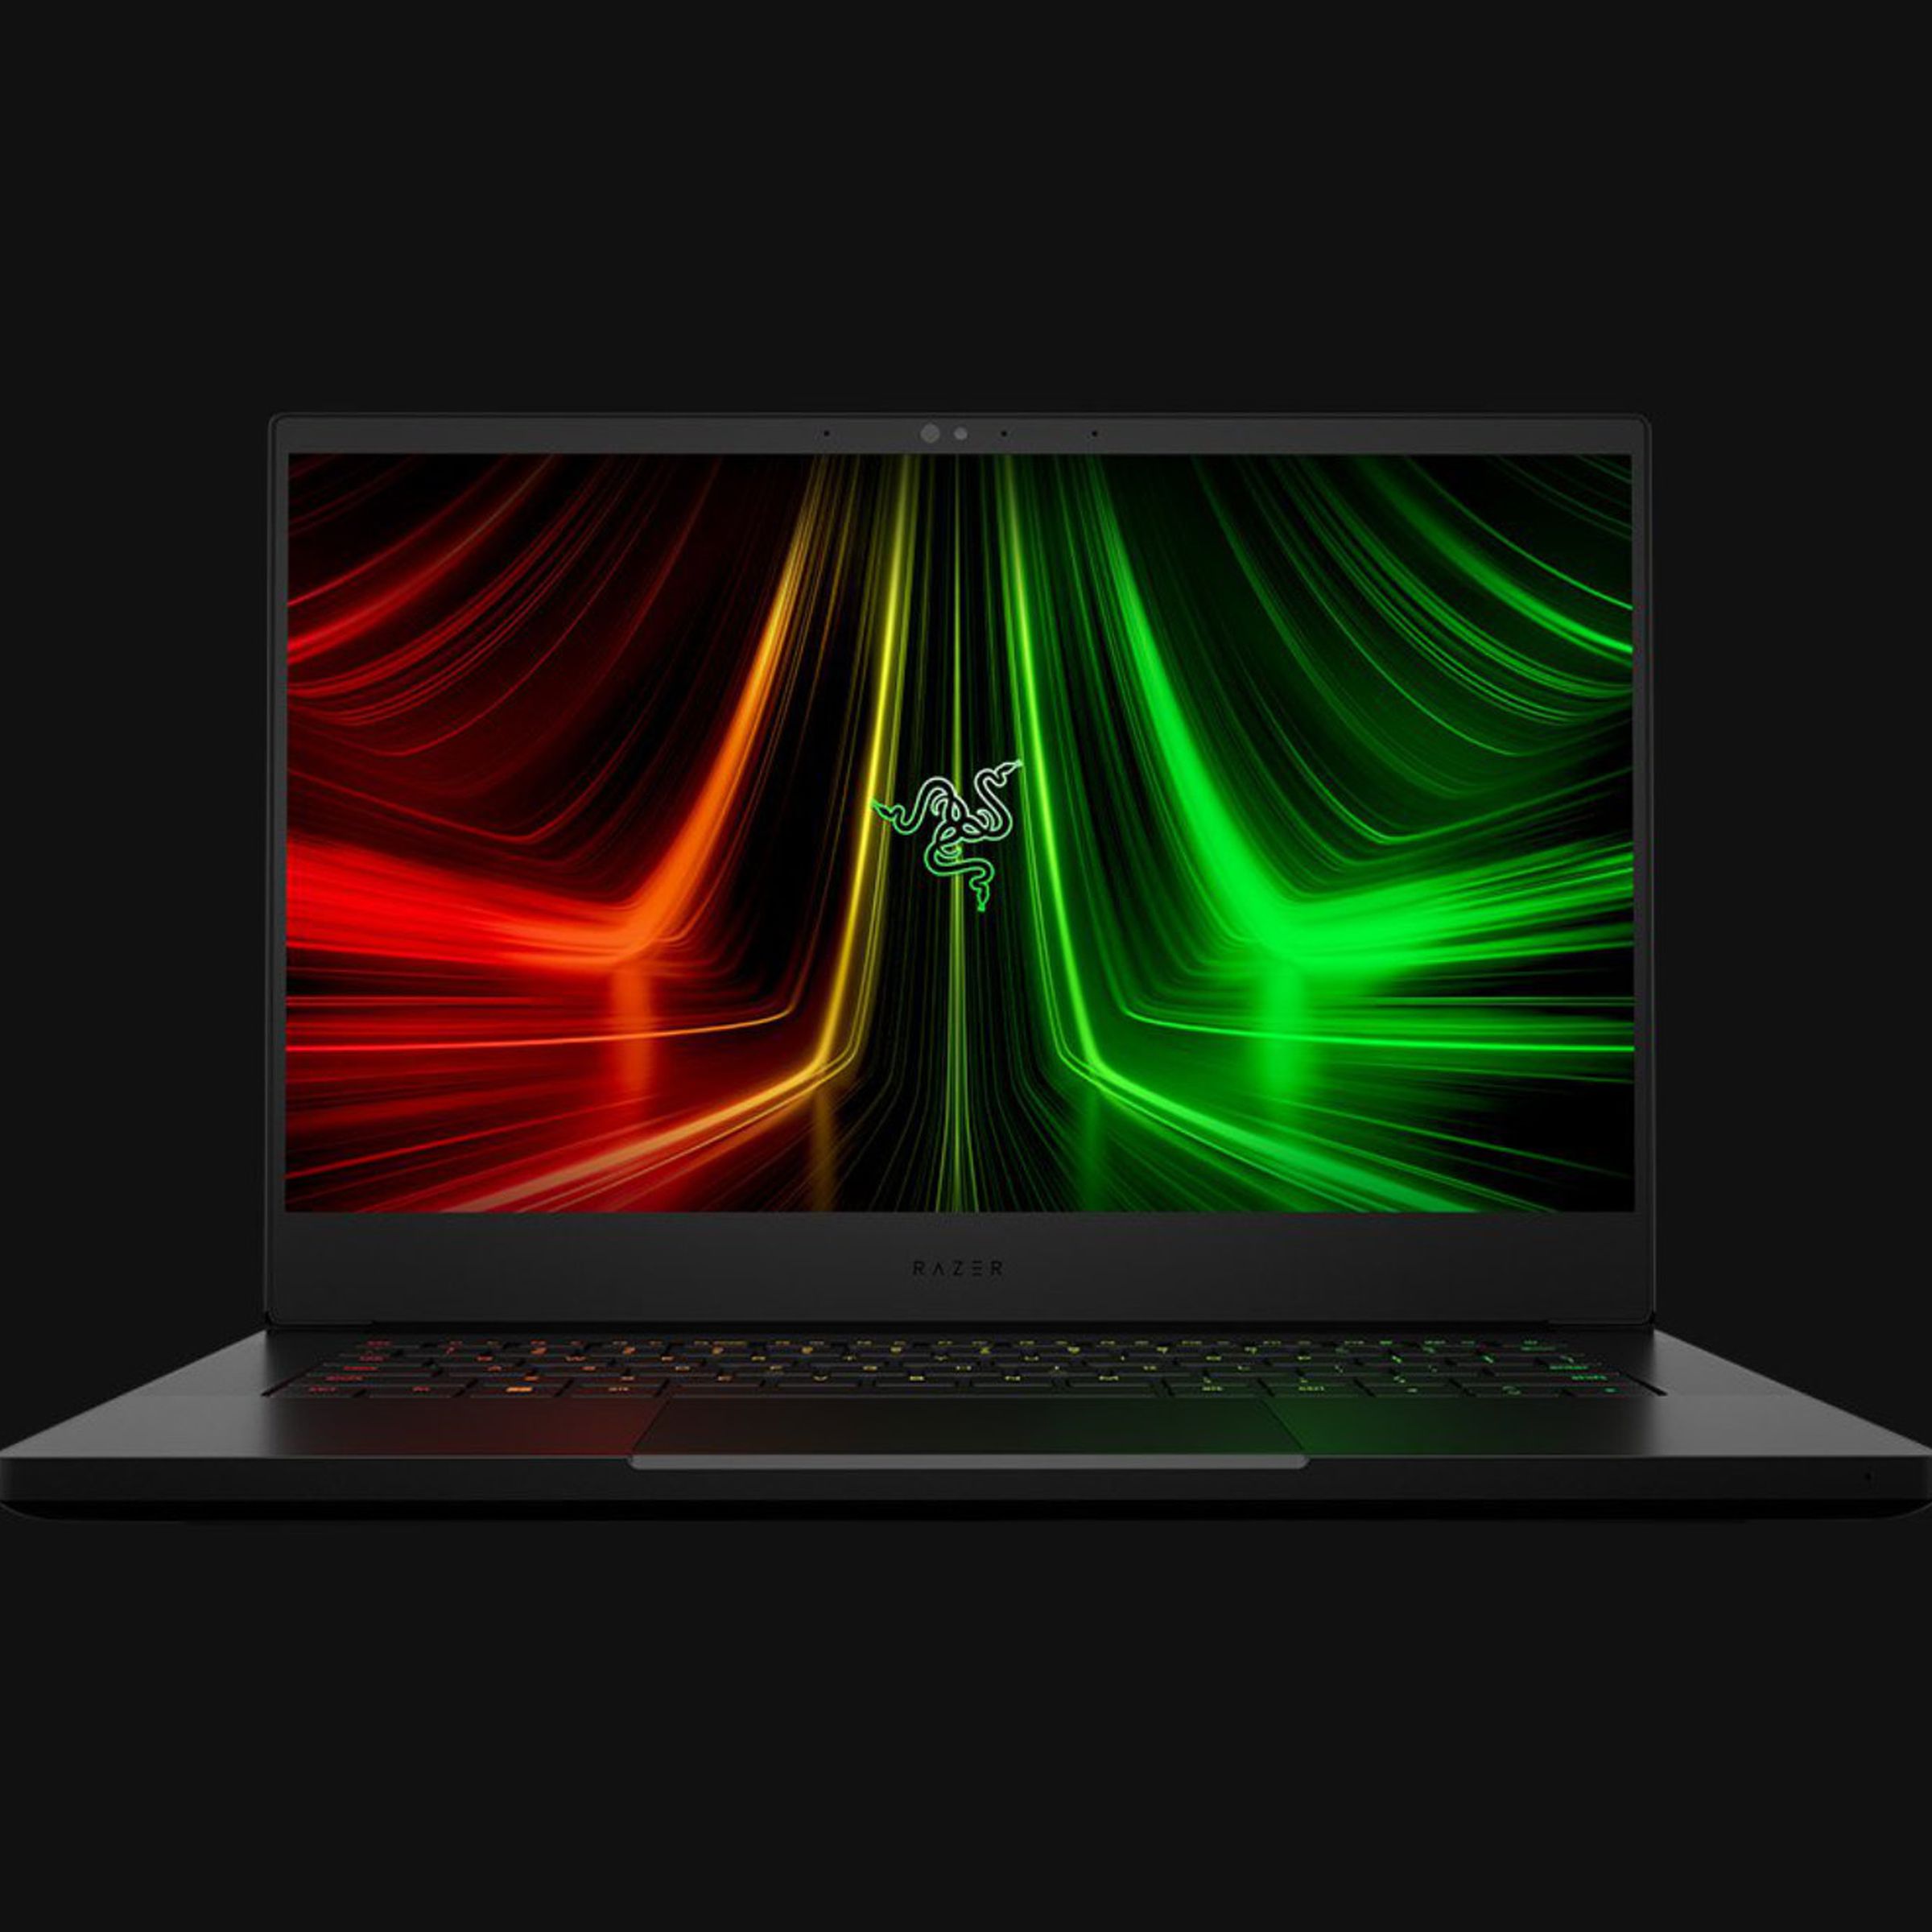 The Razer Blade 14 gaming laptop sits in a black space, opened to the view to show off its 14-inch screen.